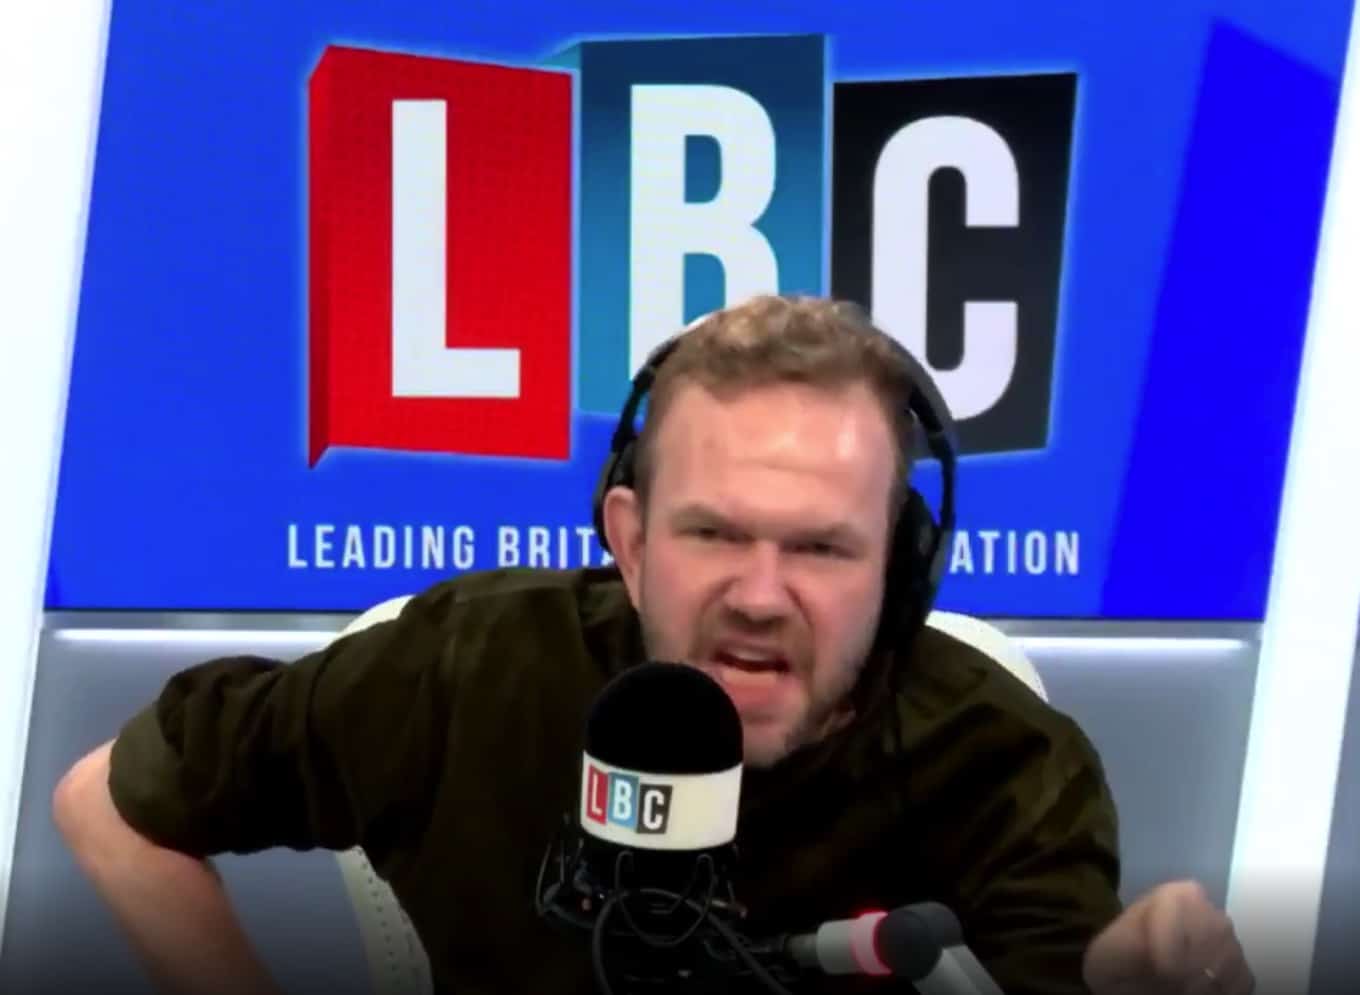 WATCH: James O’Brien hits out at Priti Patel after Ukrainian refugees video